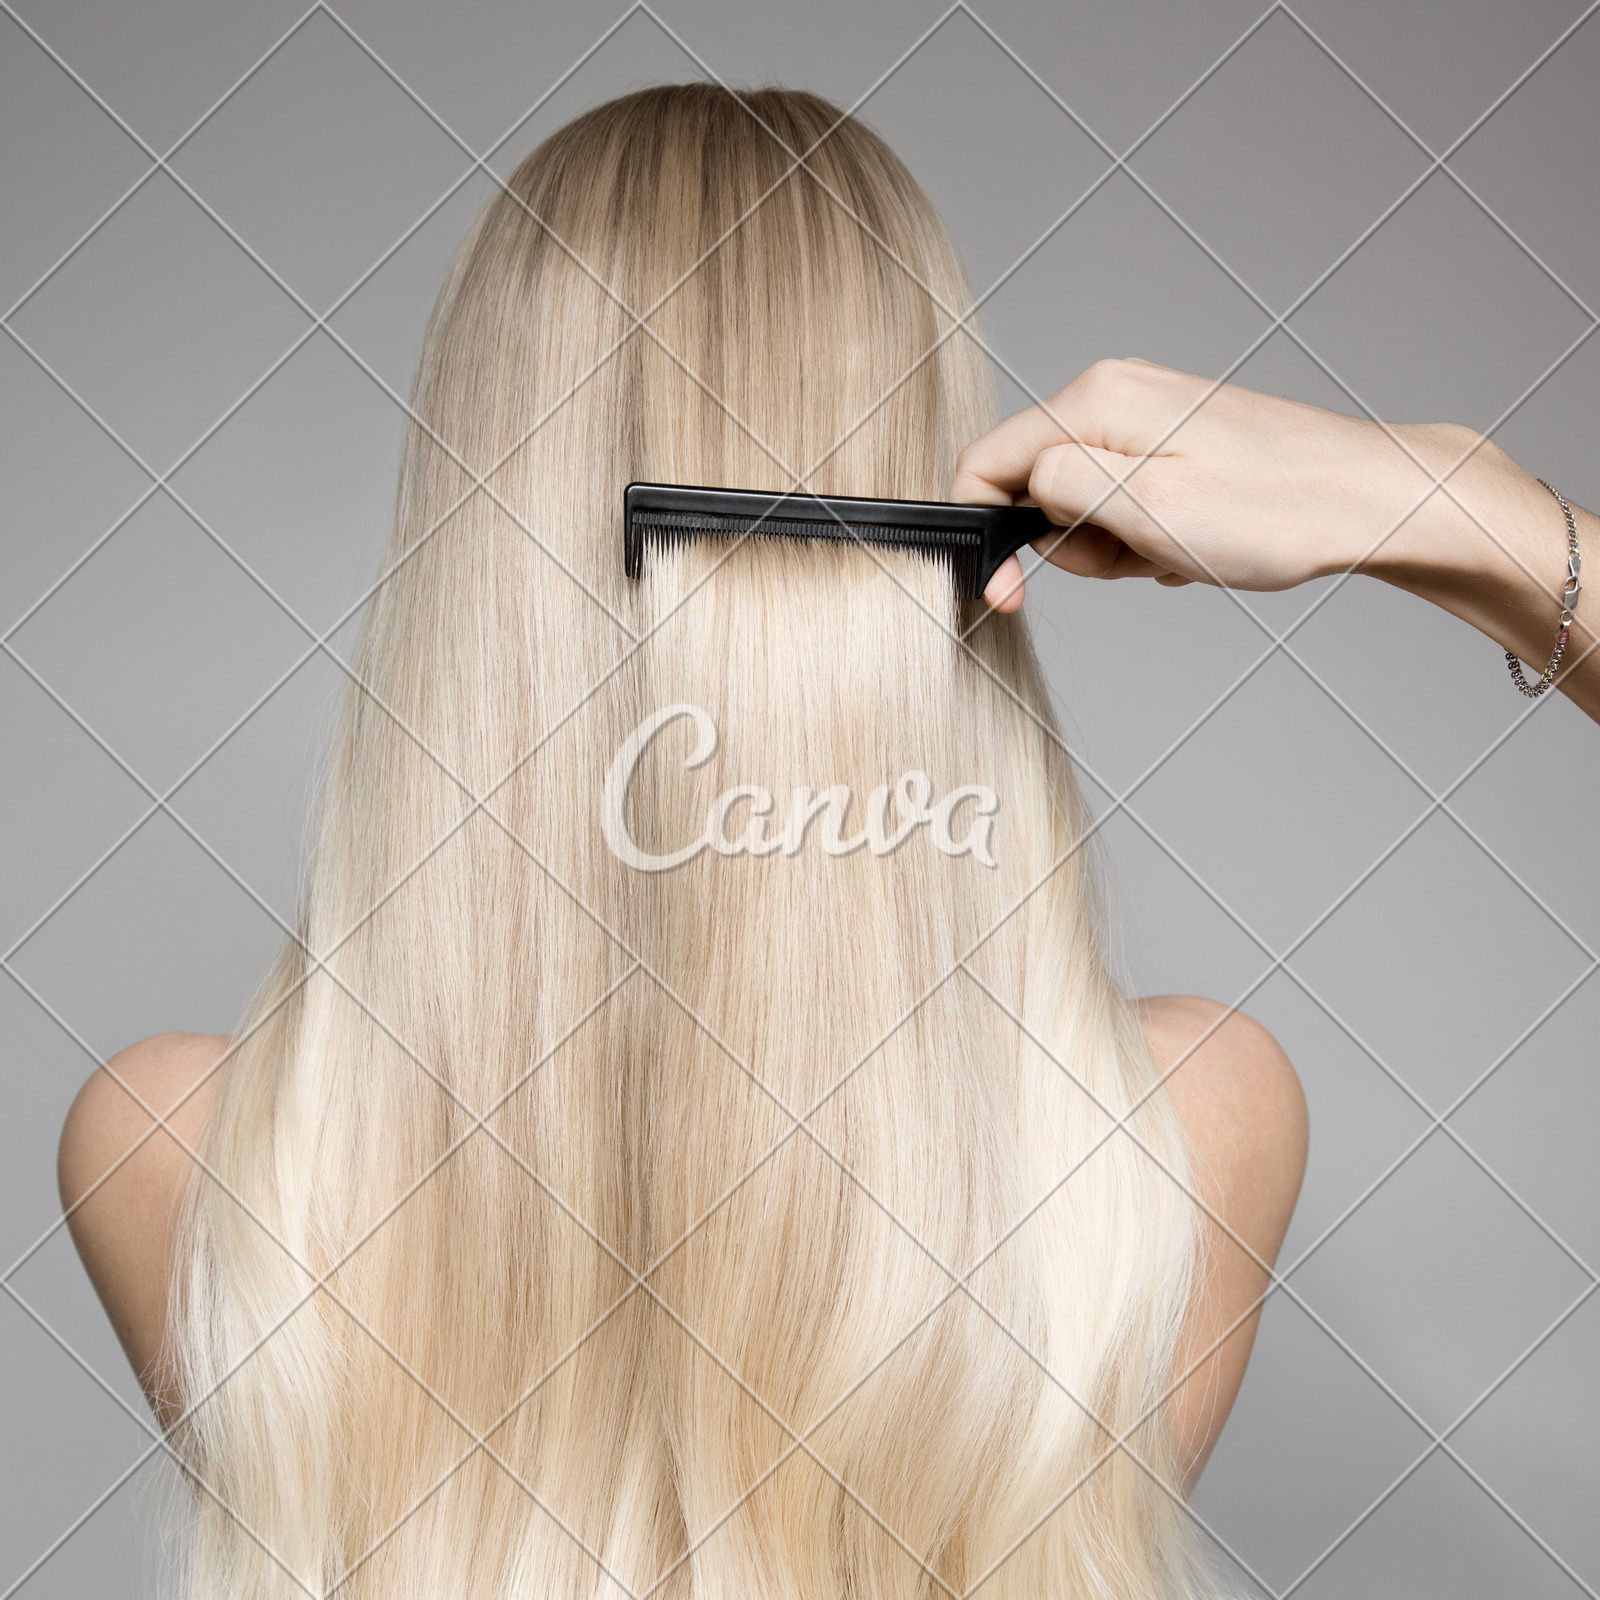 Back View Of Blond Woman Long Hair Hand With Hairbrush Photos